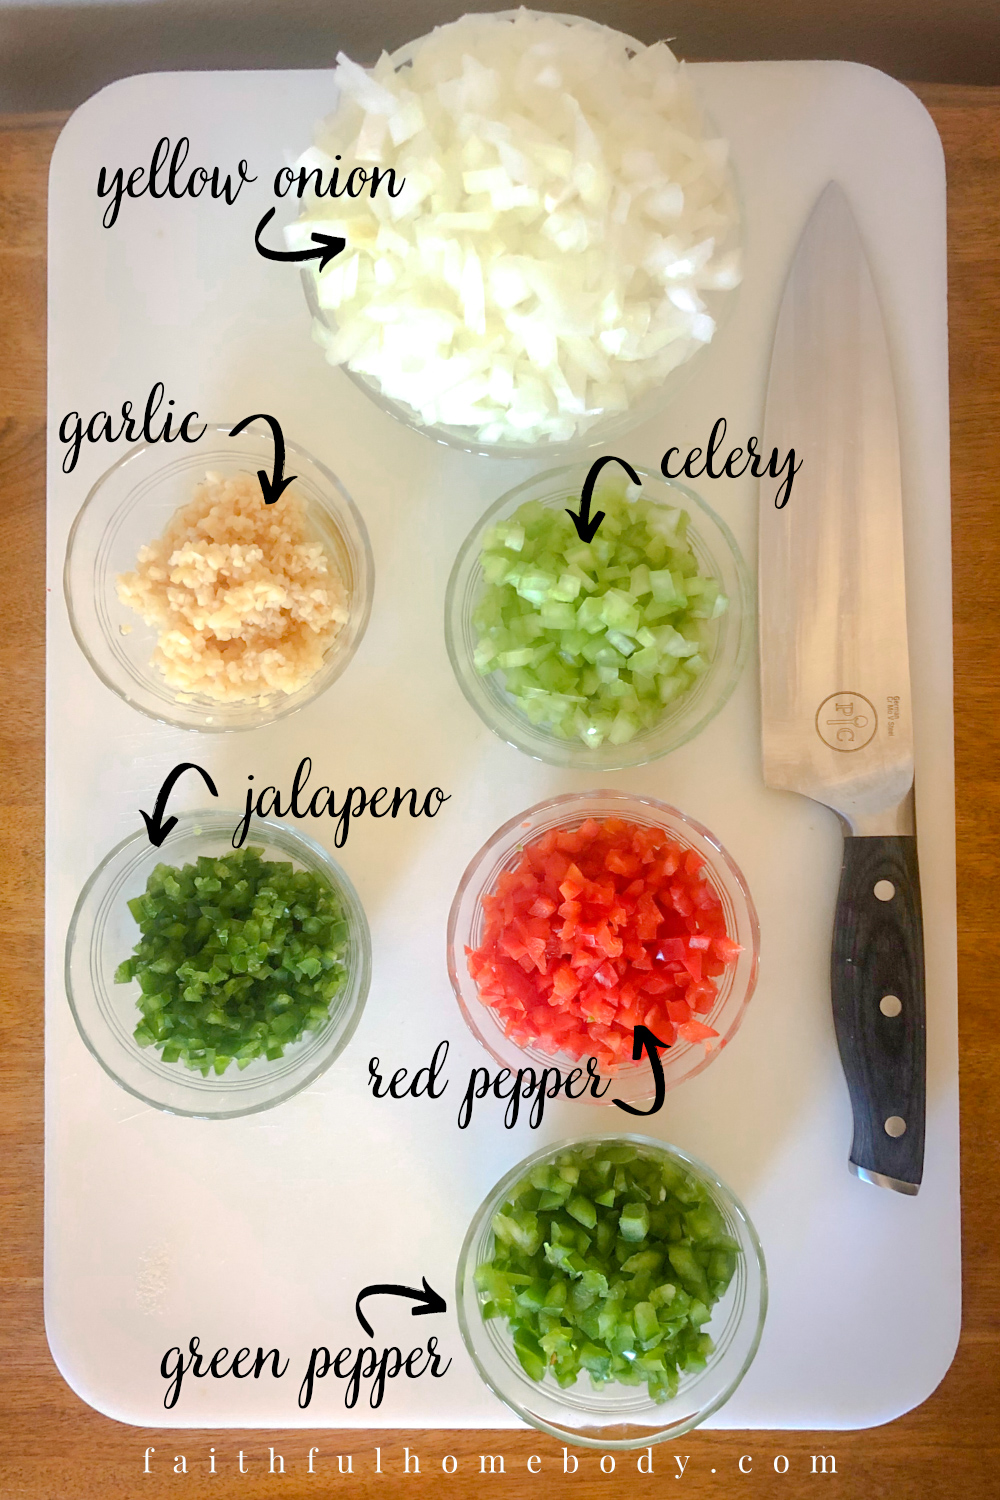 Small, clear bowls are filled with chopped onion, minced garlic, diced celery, diced red and green bell peppers, diced celery, and diced jalapeno.  They are placed on a large white cutting board with a large knife placed on the right side of the board.  